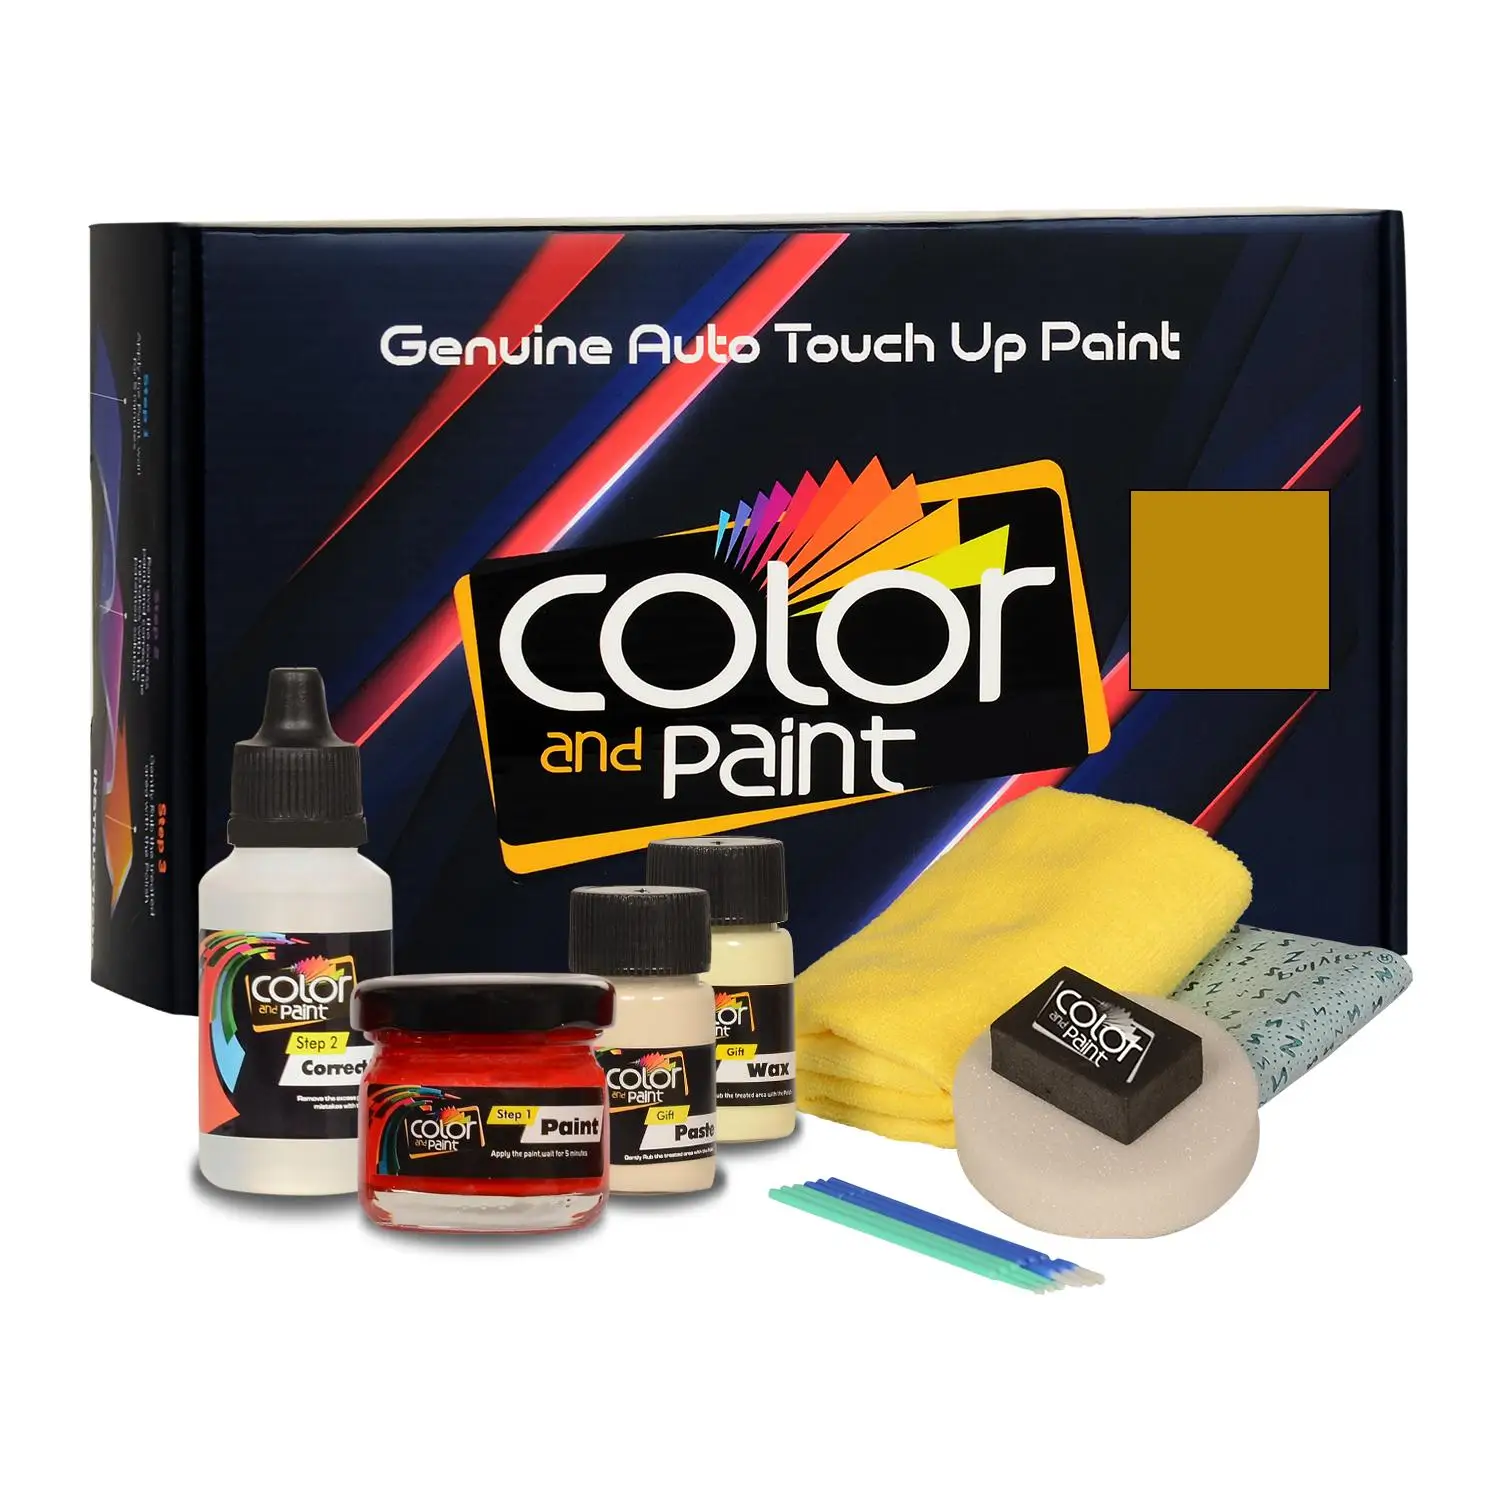 

Color and Paint compatible with Audi Automotive Touch Up Paint - BRILLIANT YELLOW - LY1B - Basic Care